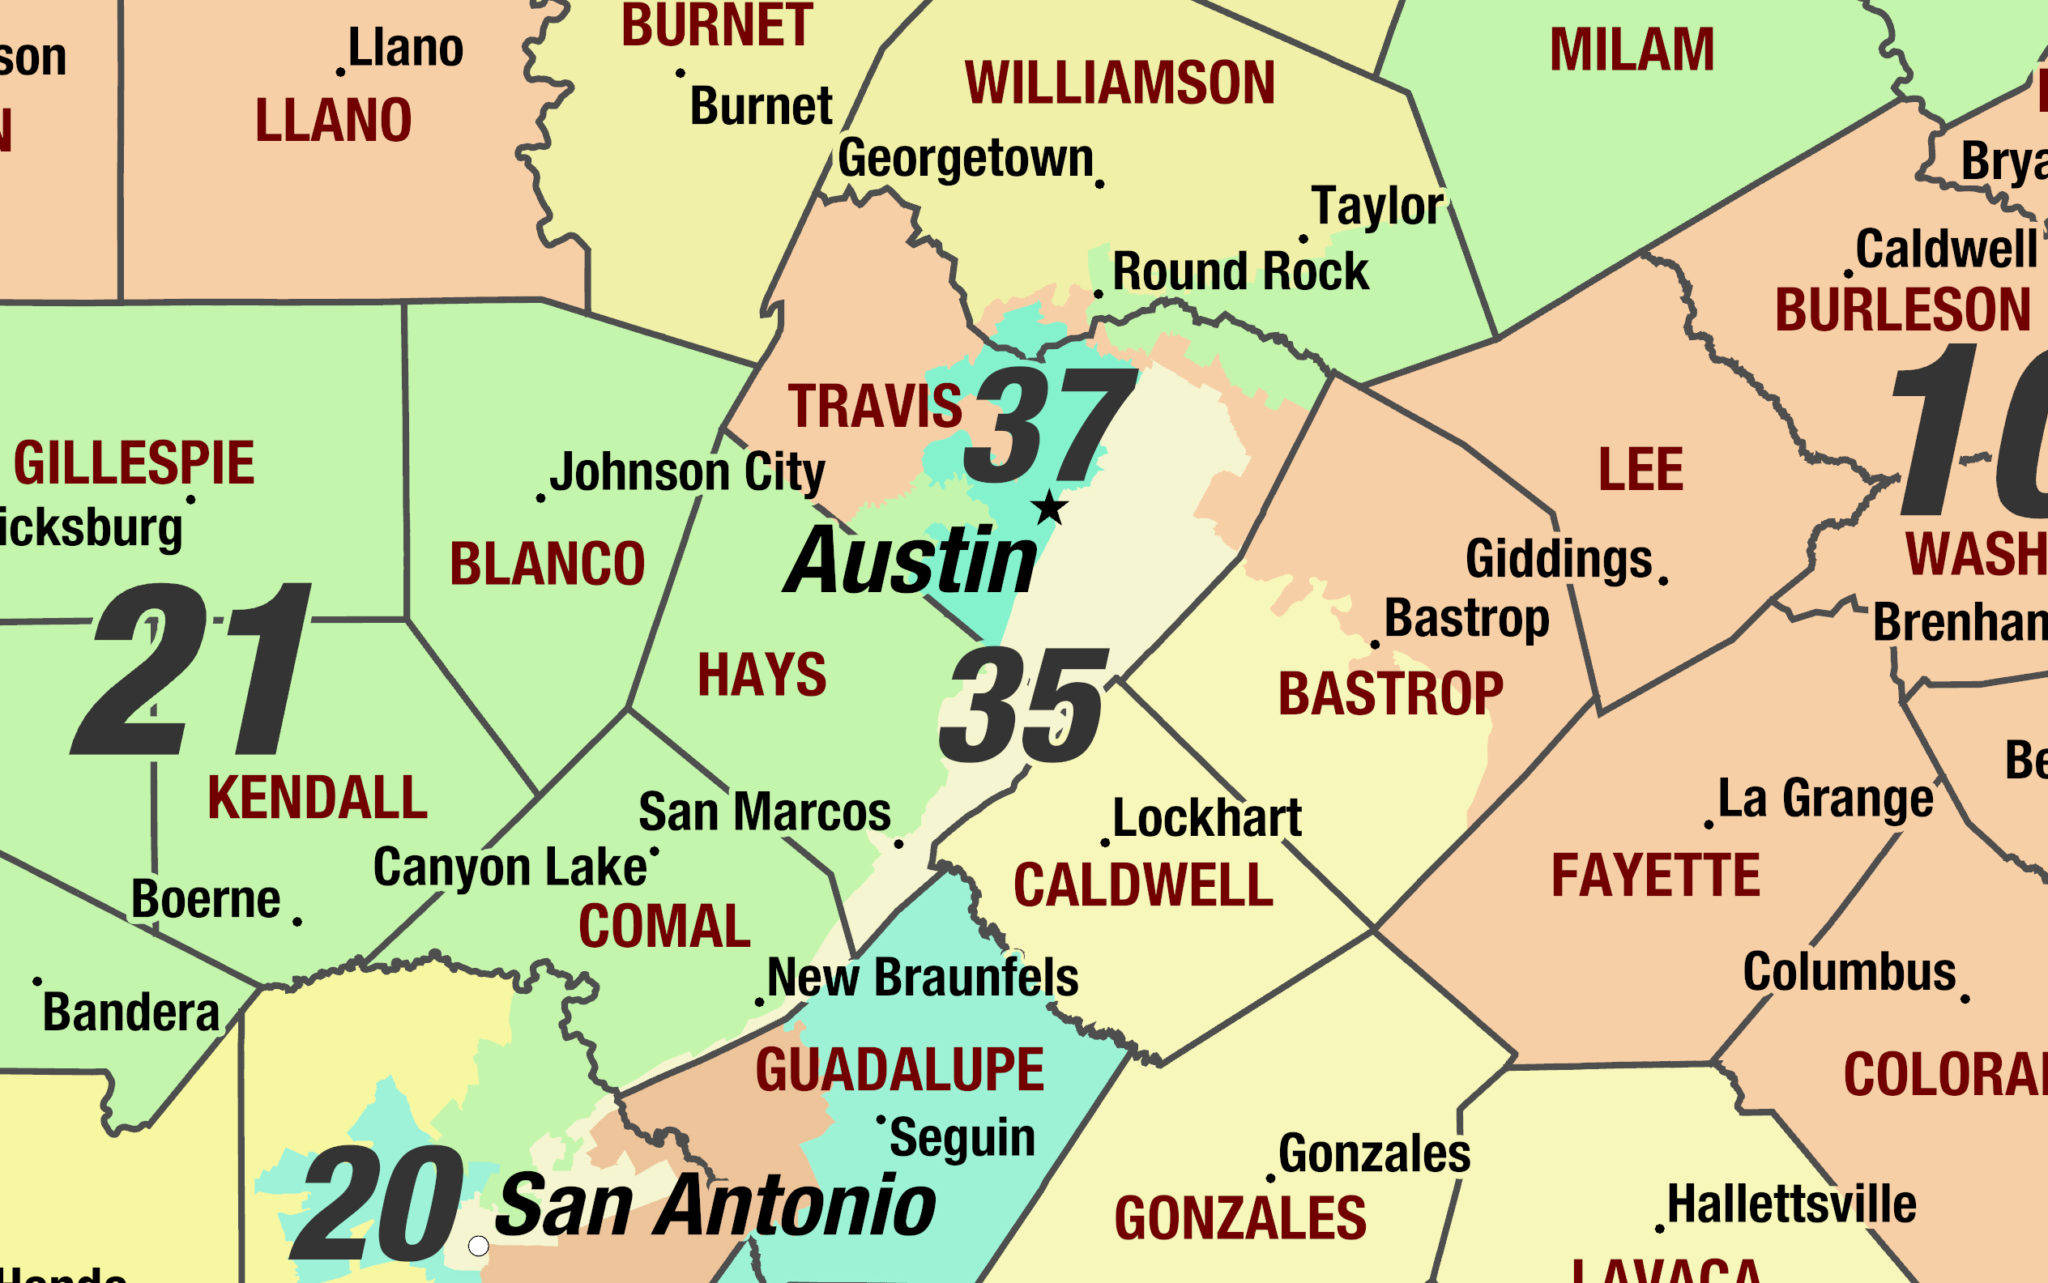 Texas 2022 Congressional Districts Wall Map By Mapshop The Map Shop 0415